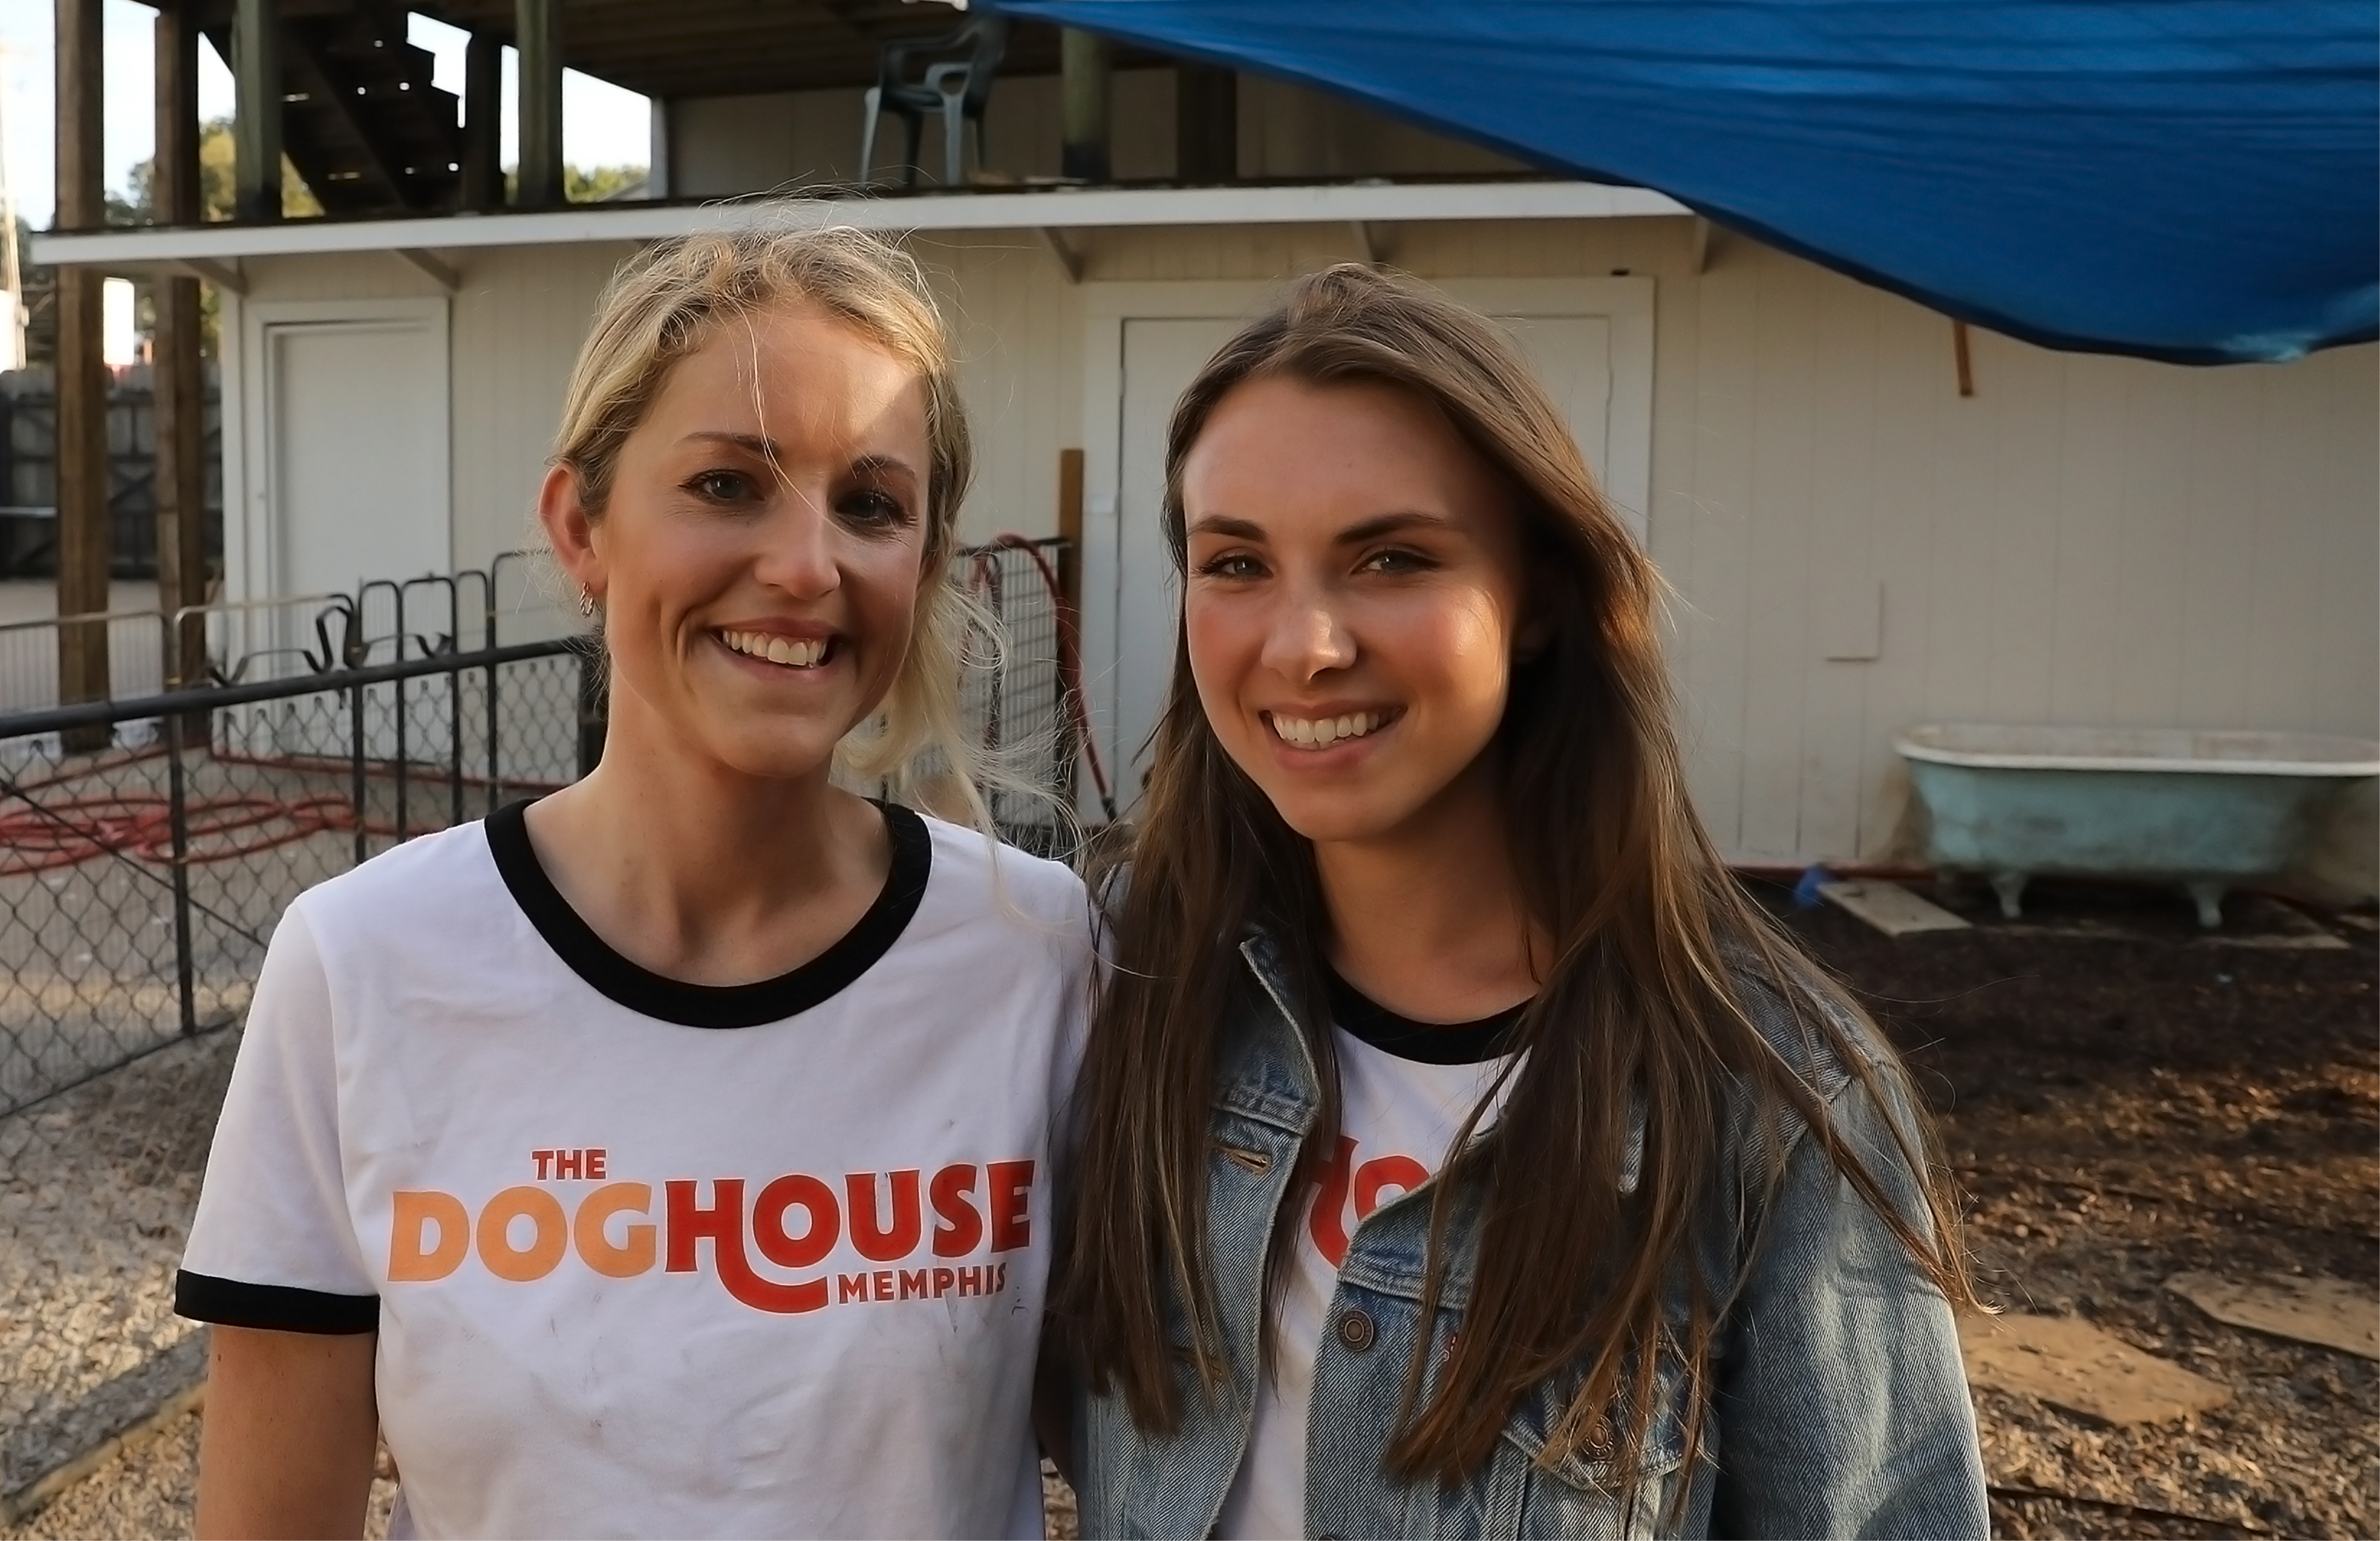 Owner Hayley Efird (L) and creative director Brianna Kraus (R) launched The Doghouse with office manager Judith Currin in July. (Patrick Lantrip/Daily Memphian)